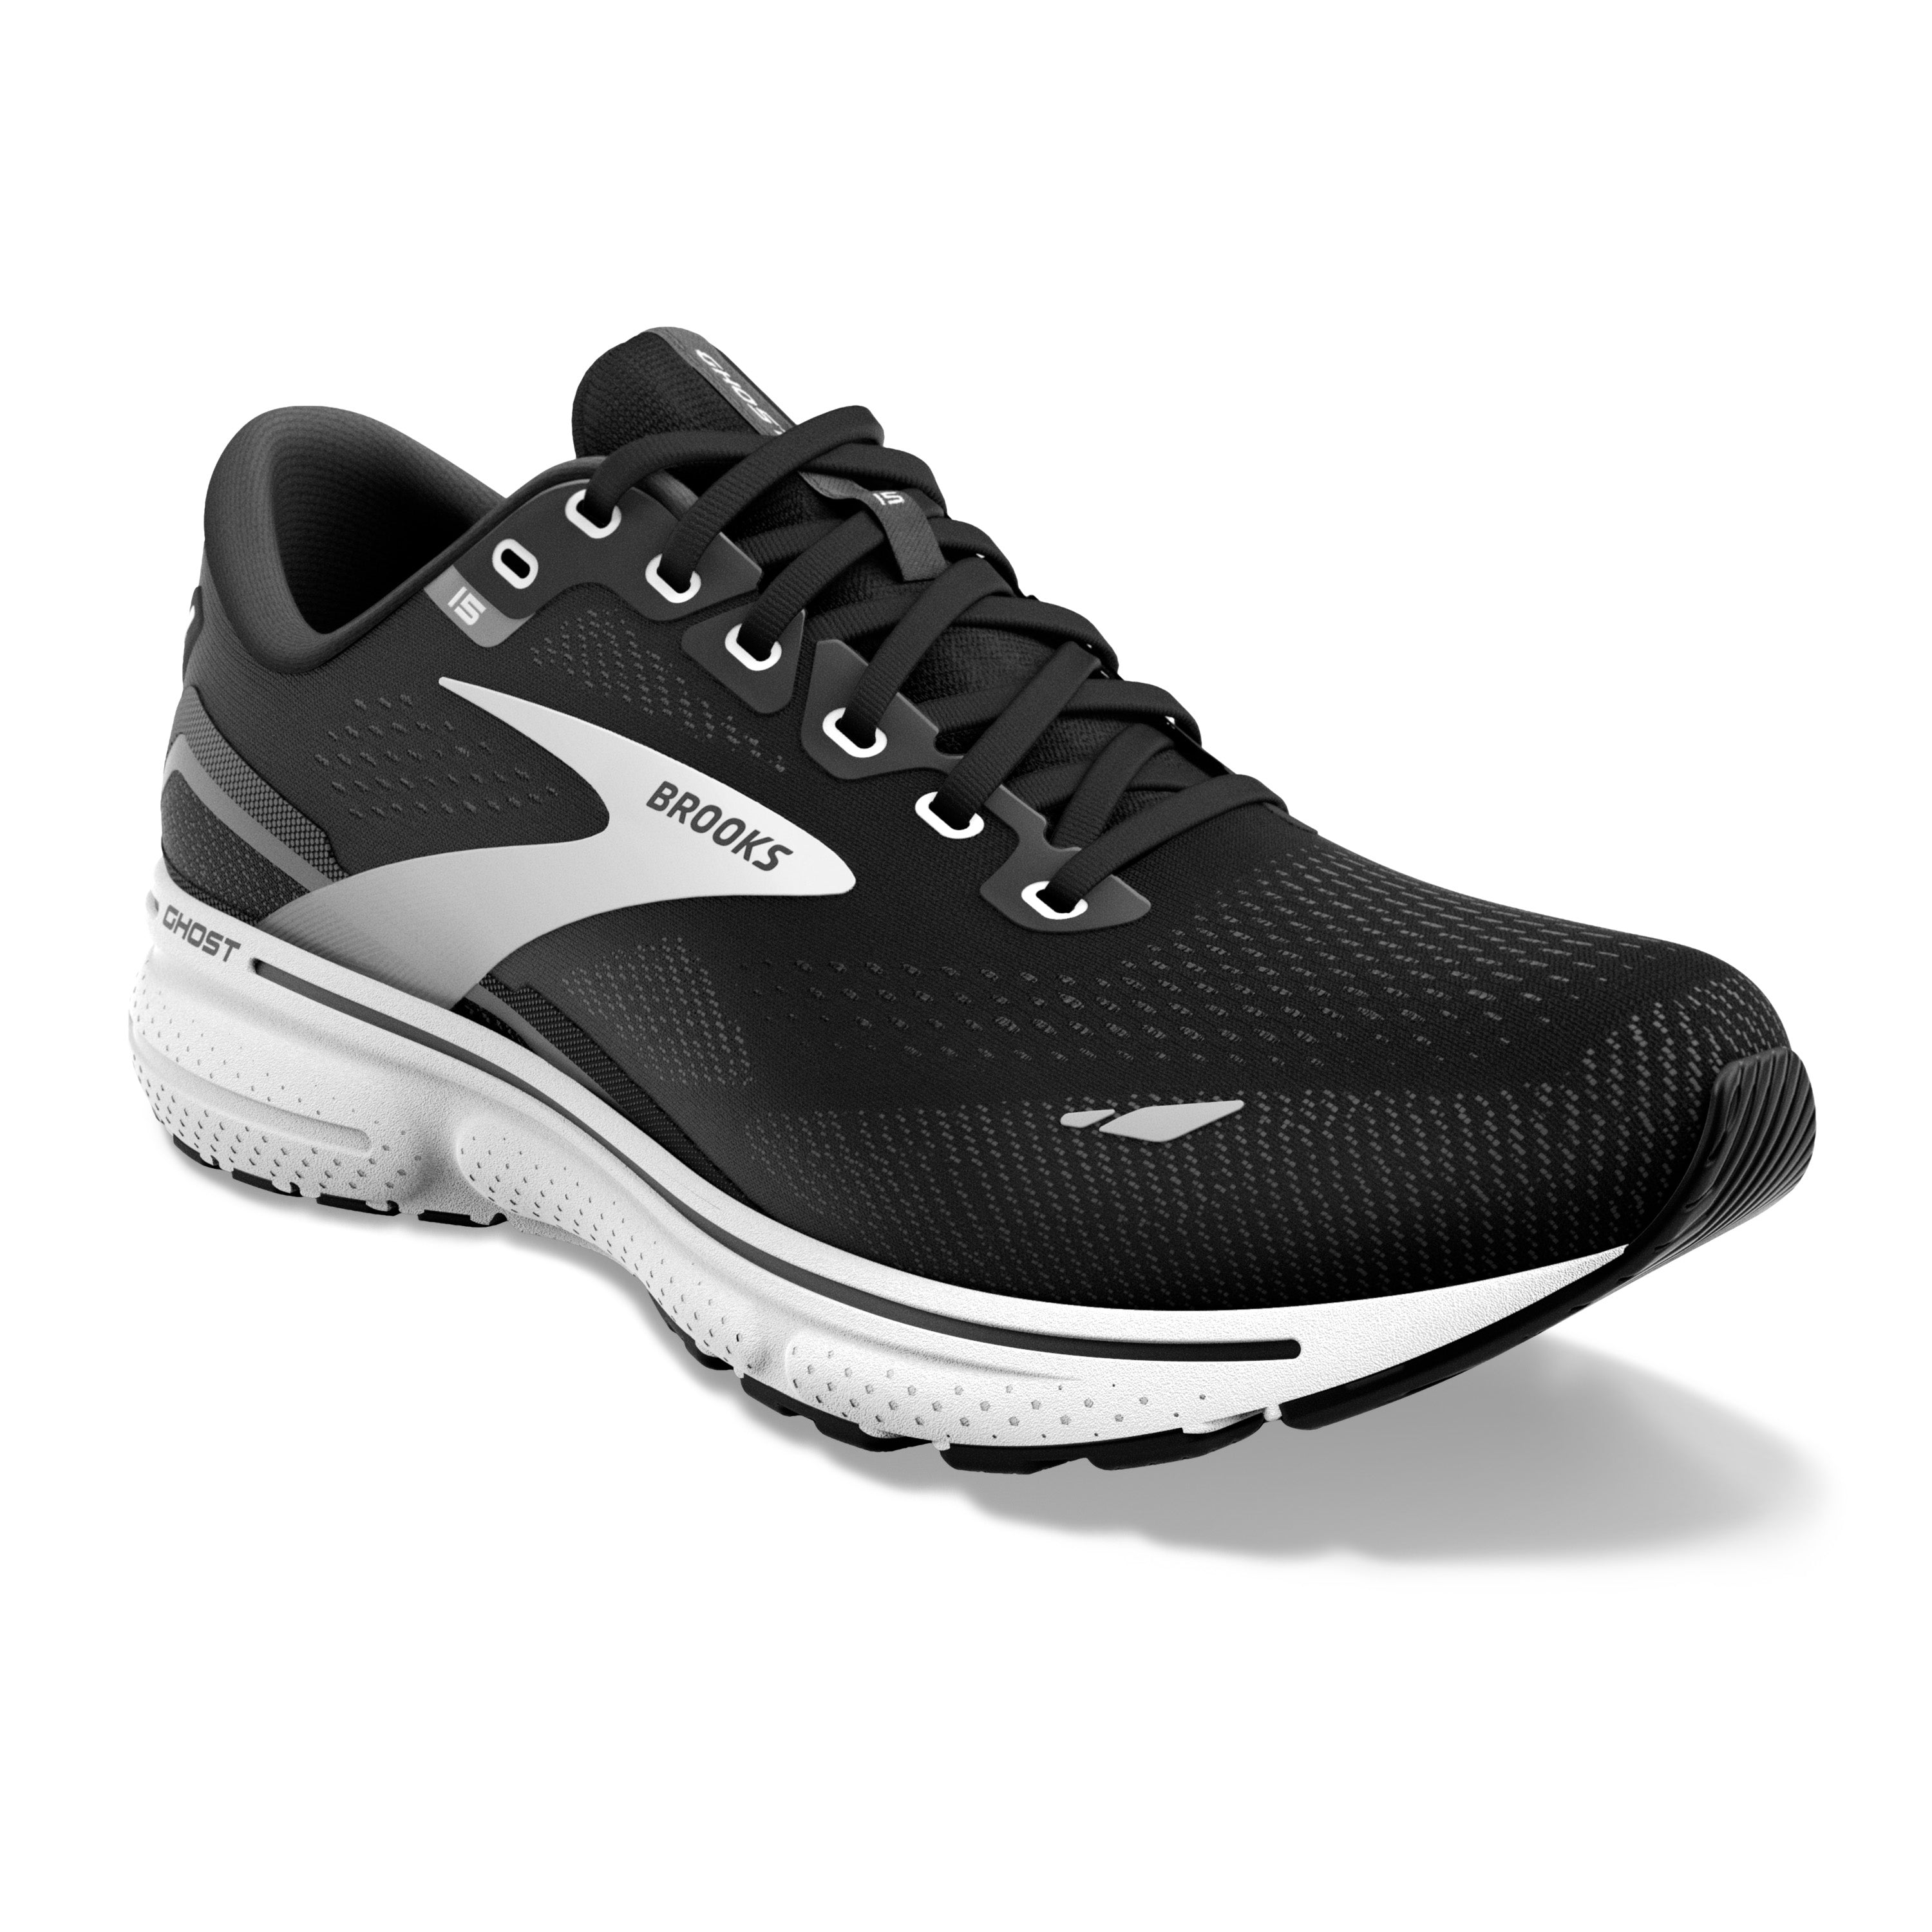 Women's Brooks Ghost 15 Color: Women's Brooks Ghost 15 Color: Black/Blackened Pearl/White (WIDE WIDTH)